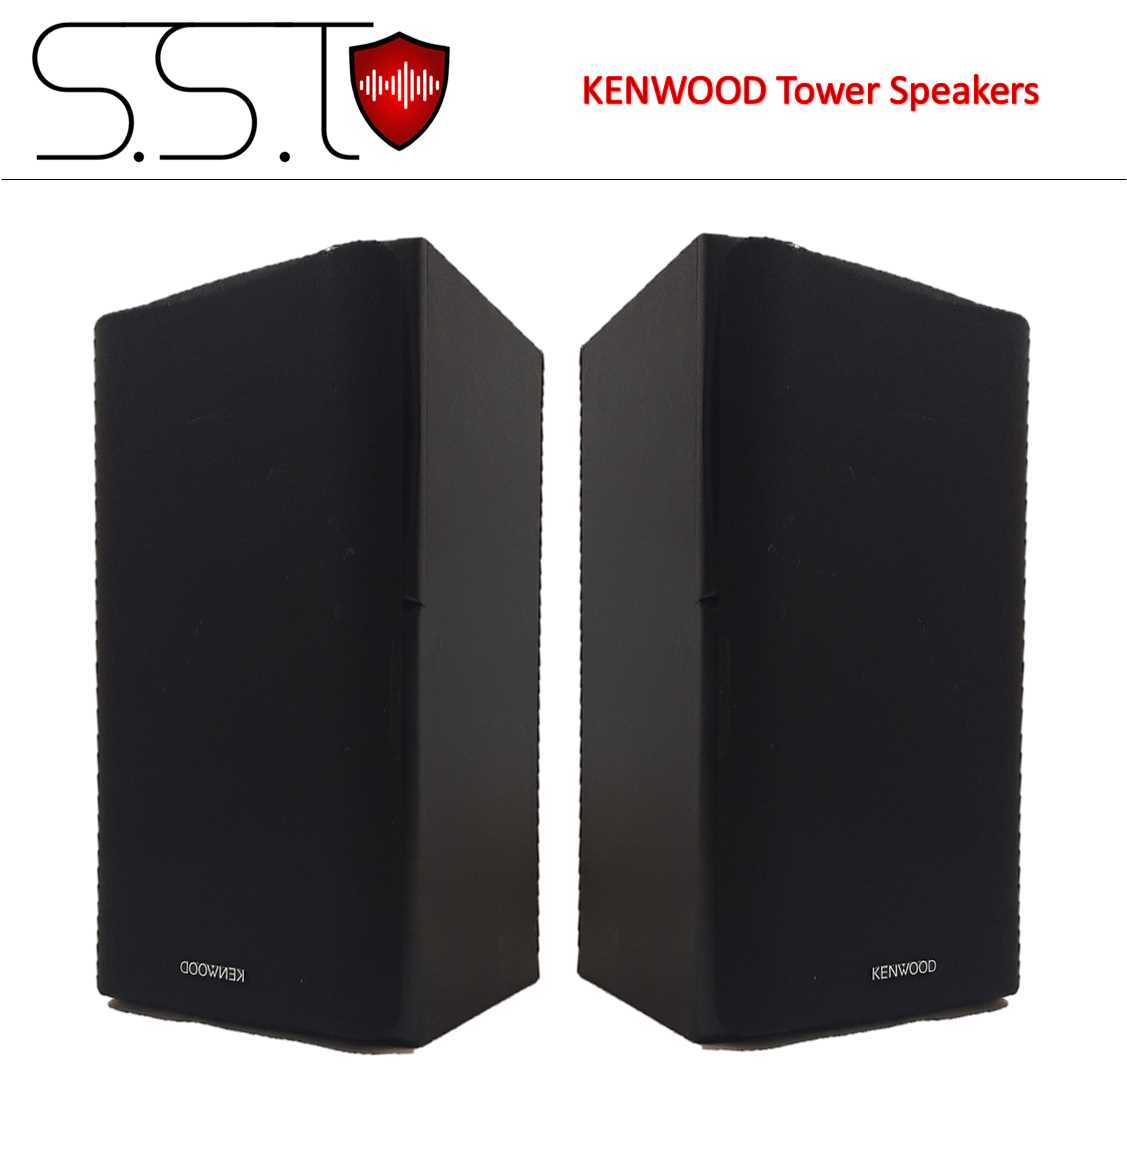 KENWOOD Tower Speakers for Sale sound and safety technologies